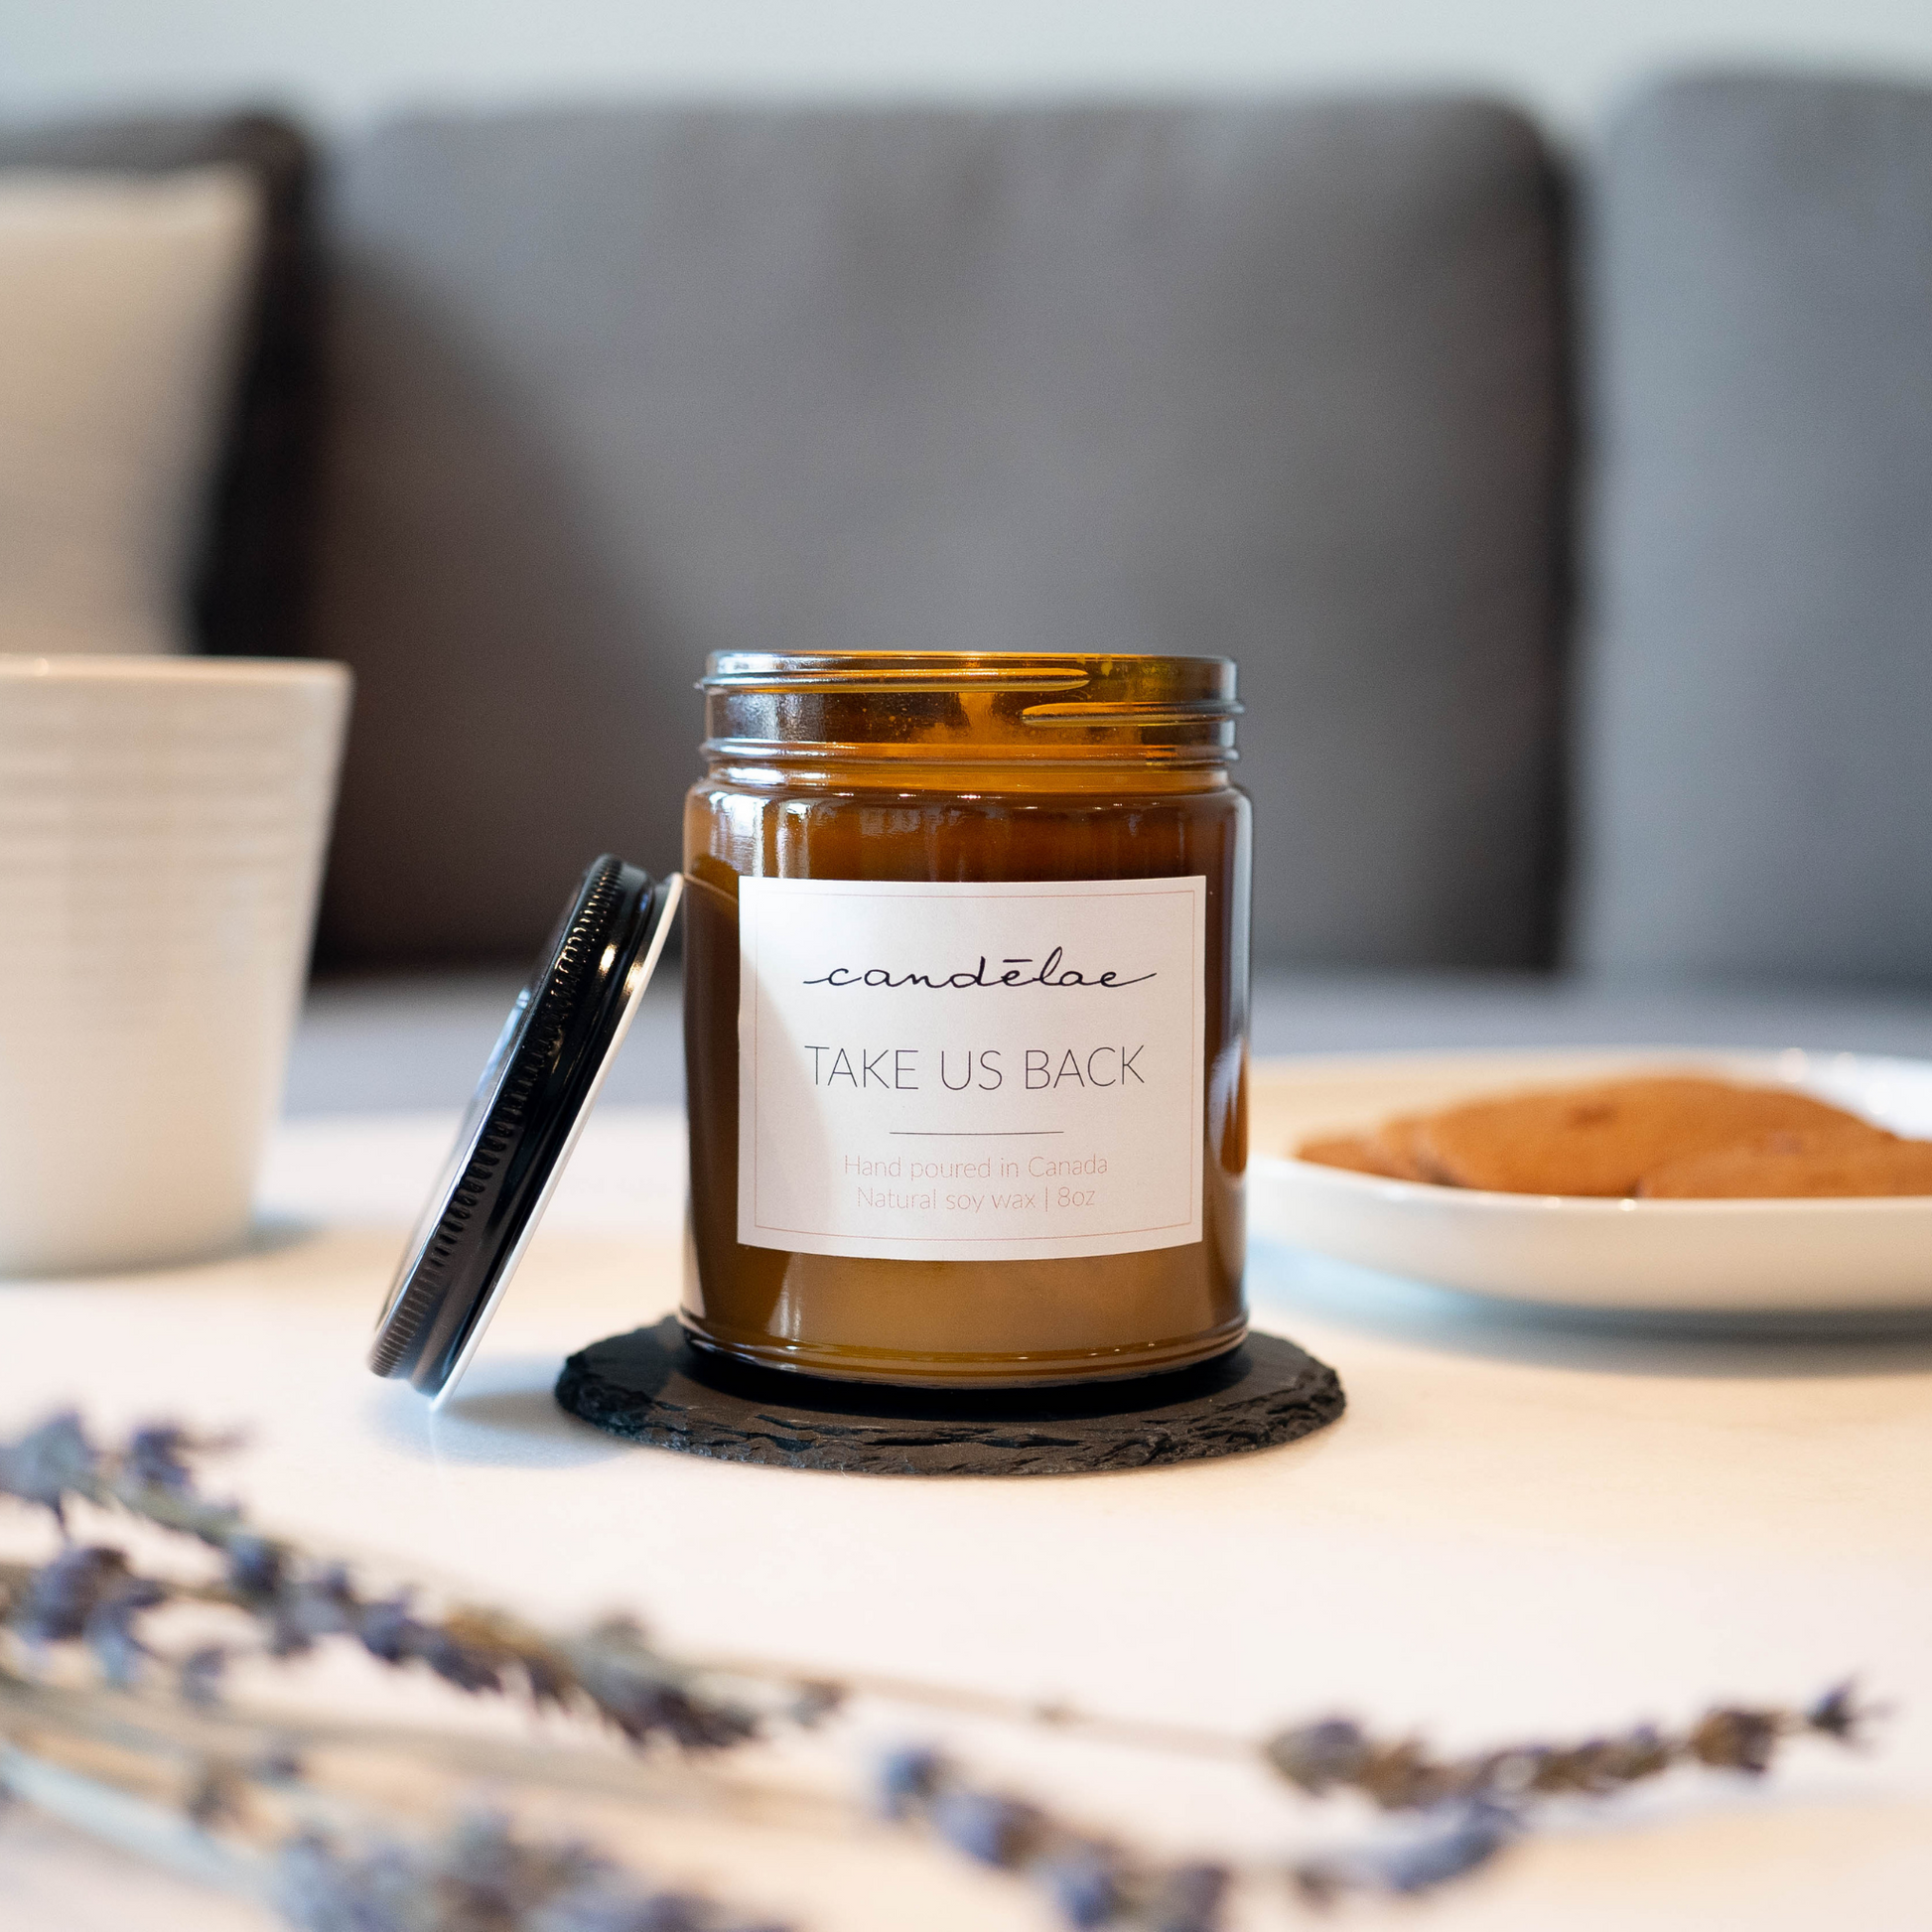 Take us back scented candle by candēlae has been put on the coffee table next to lavender